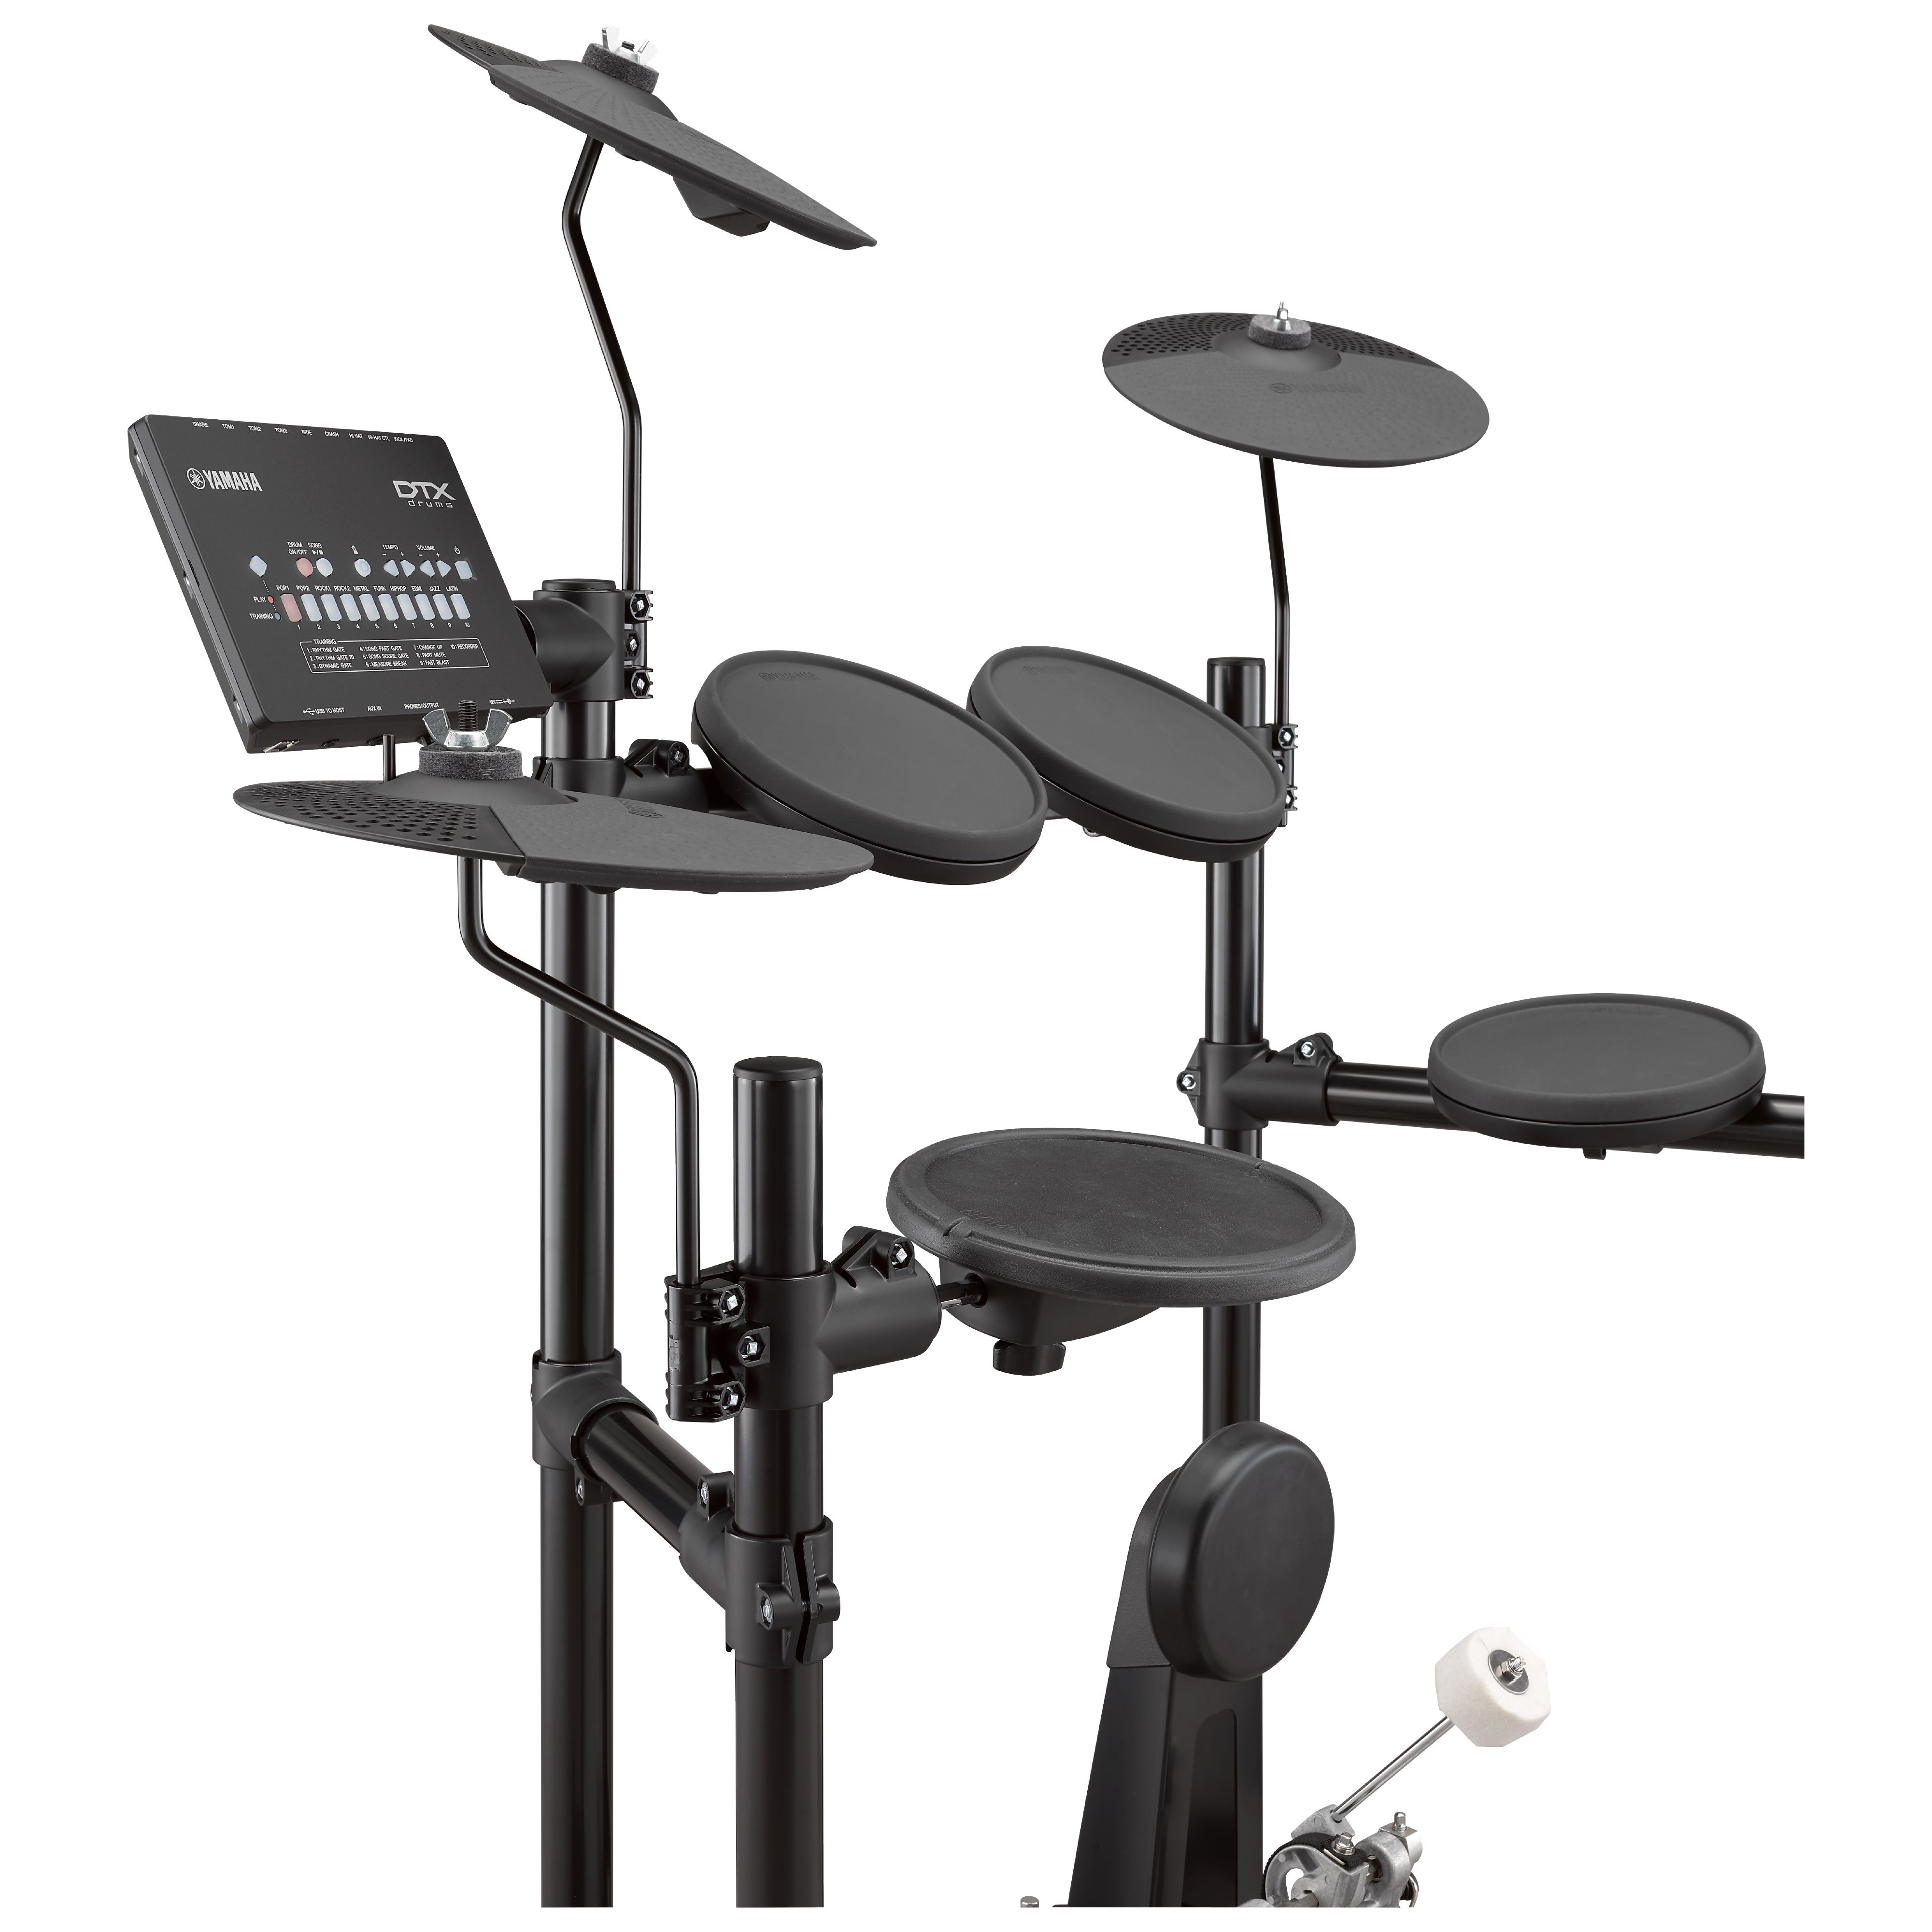 DTX402 Series - Products - Electronic Drum Kits - DTX Electronic